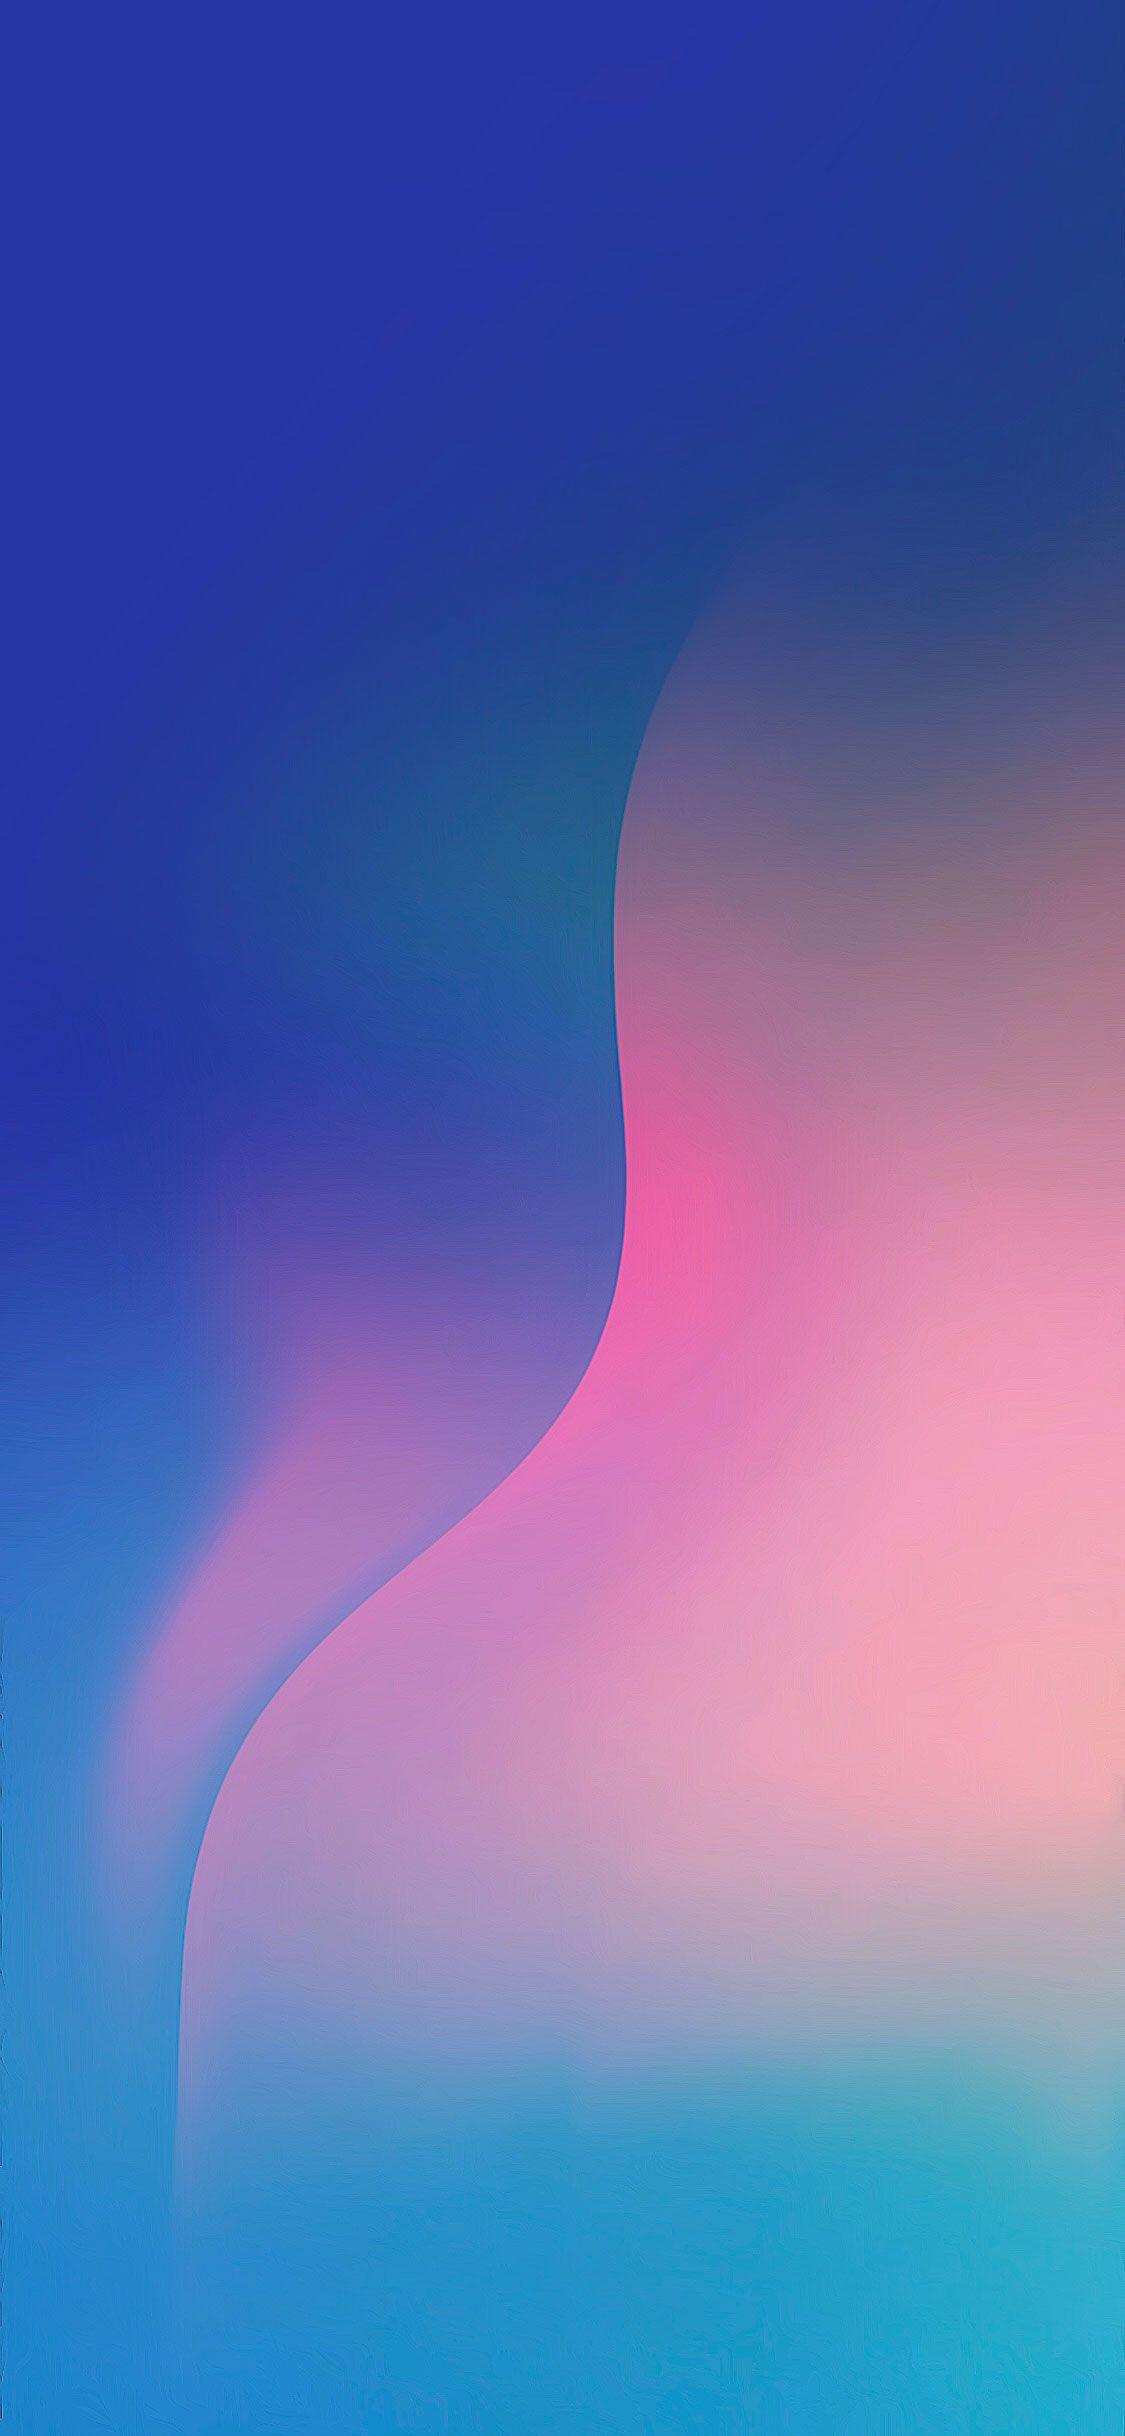 Best High Quality iPhone X Wallpaper & Background